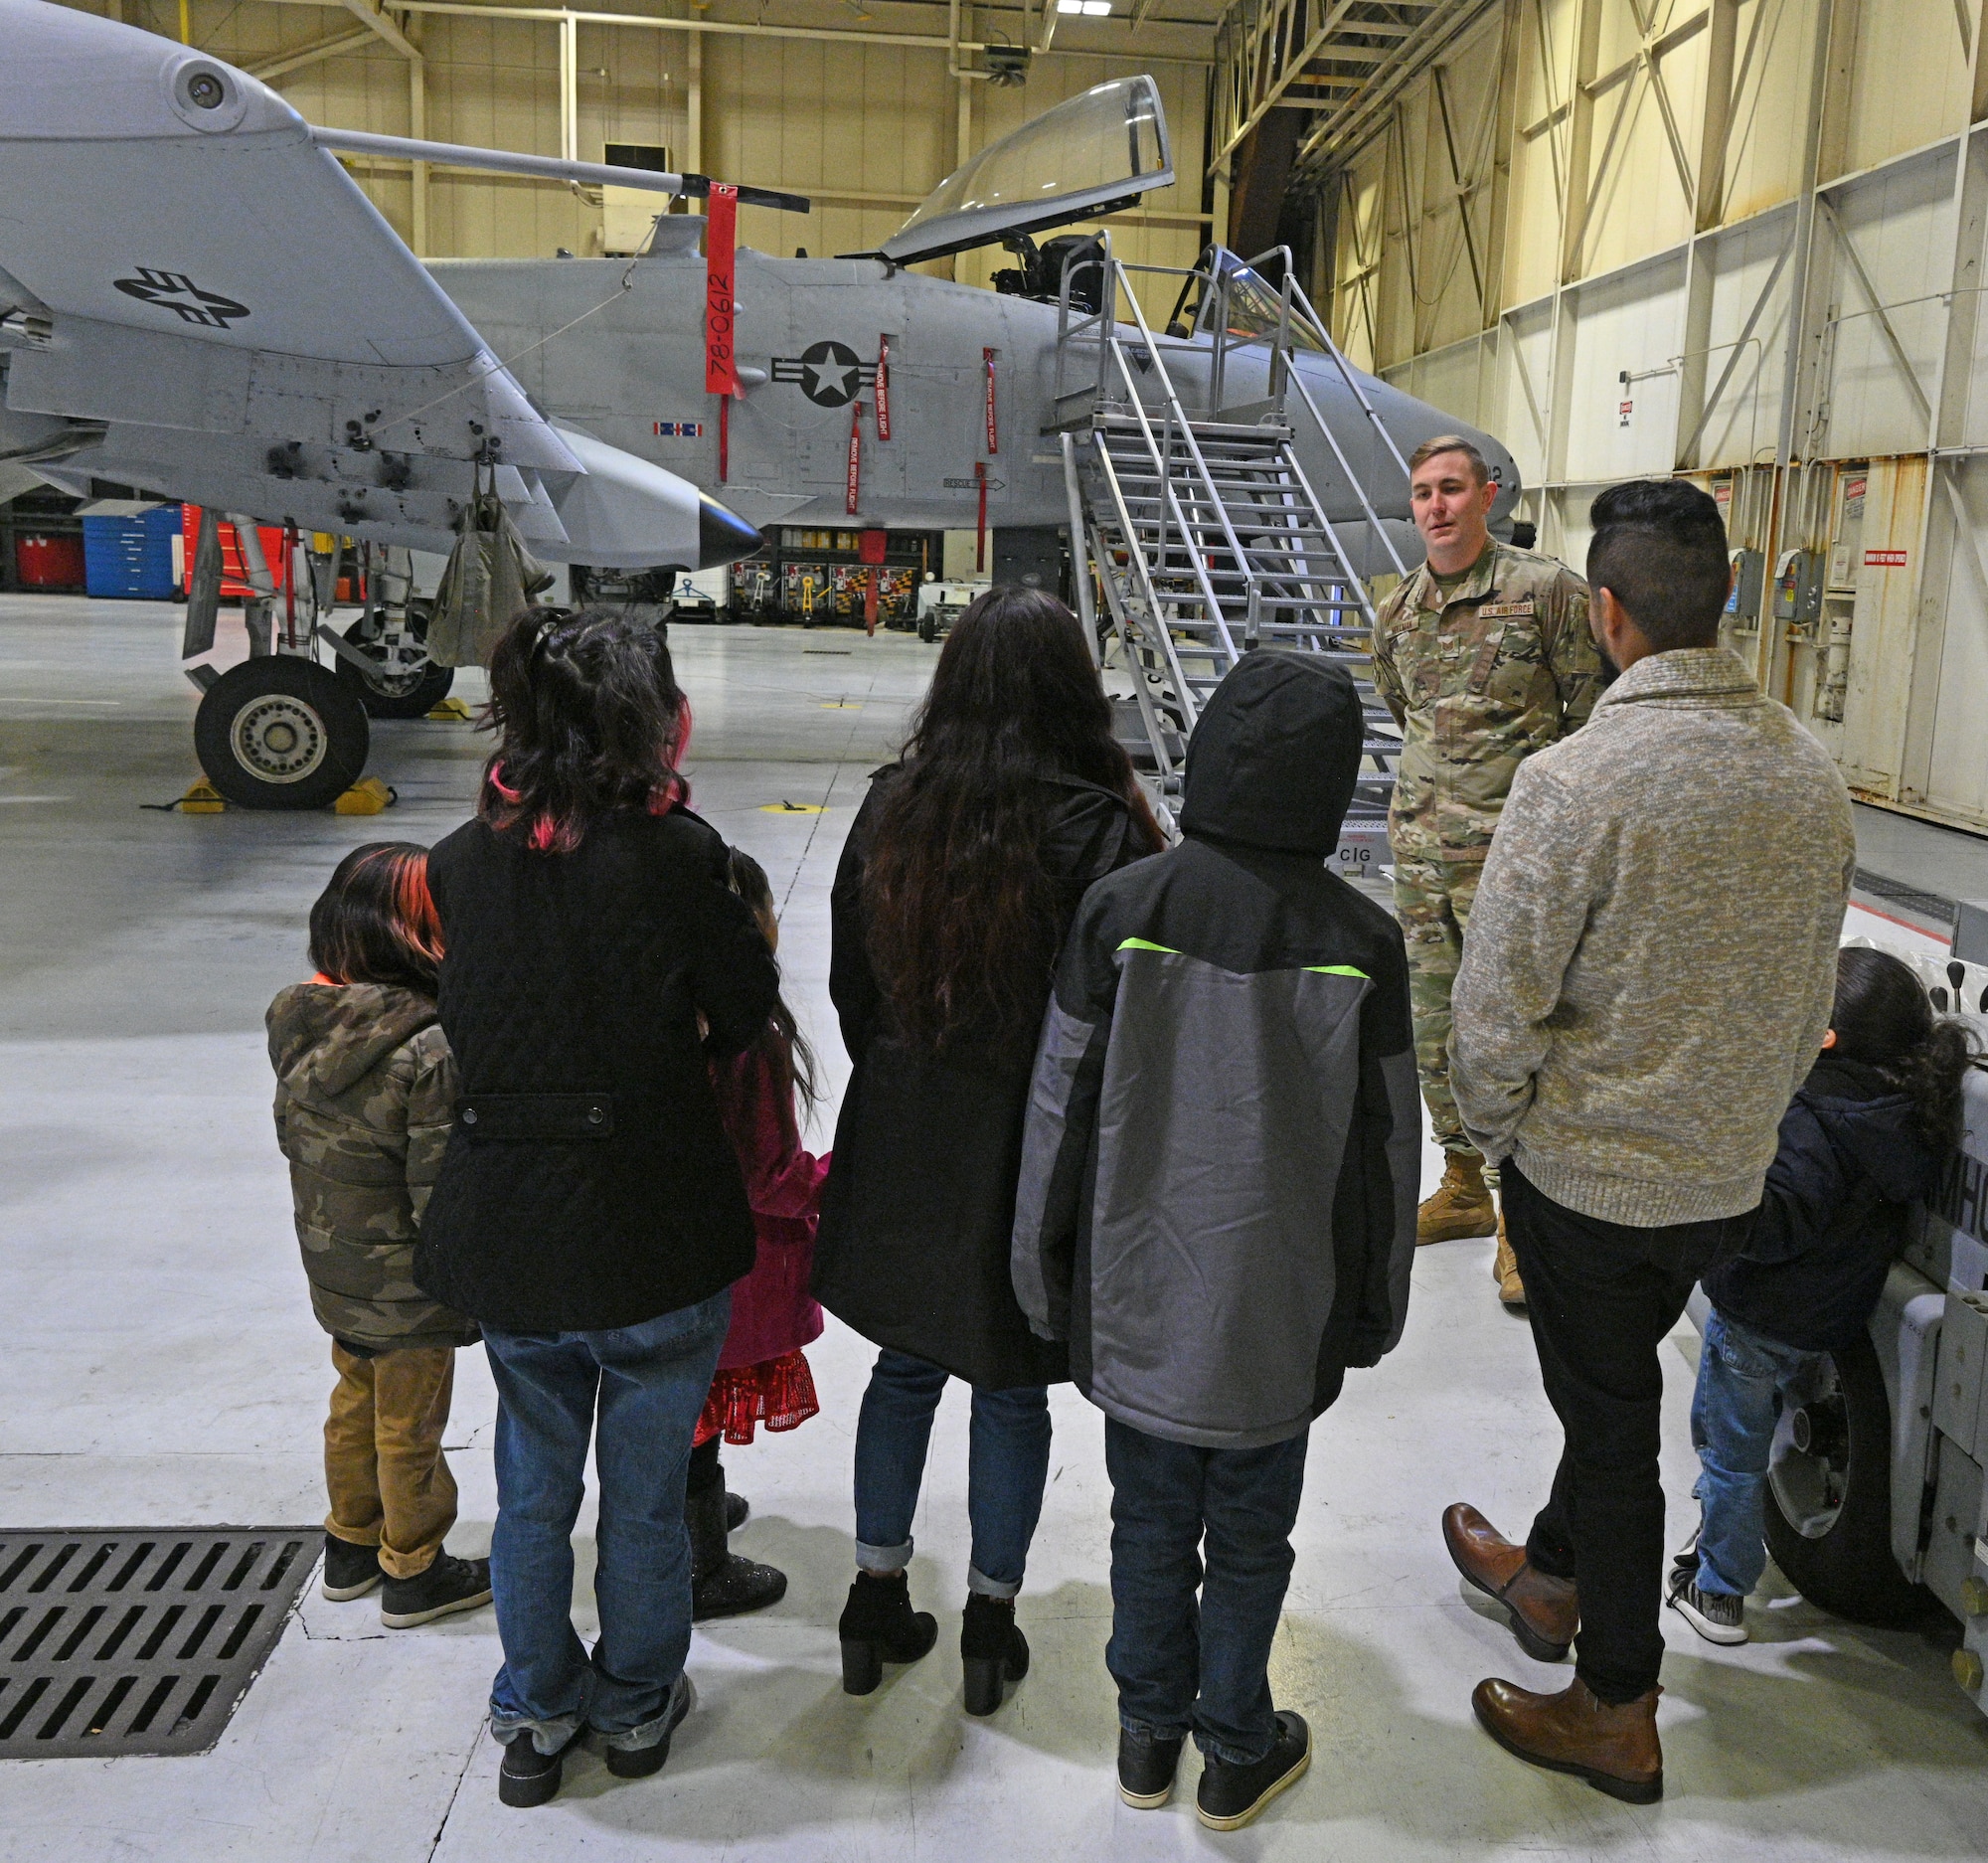 U.S. Air Force Tech. Sgt. Eric Hollman, 175th Wing recruiter, gives a tour of the A-10C Thunderbolt II aircraft to the Chavez family at Warfield Air National Guard Base at Martin State Airport, Middle River, Md., on December 20, 2022.